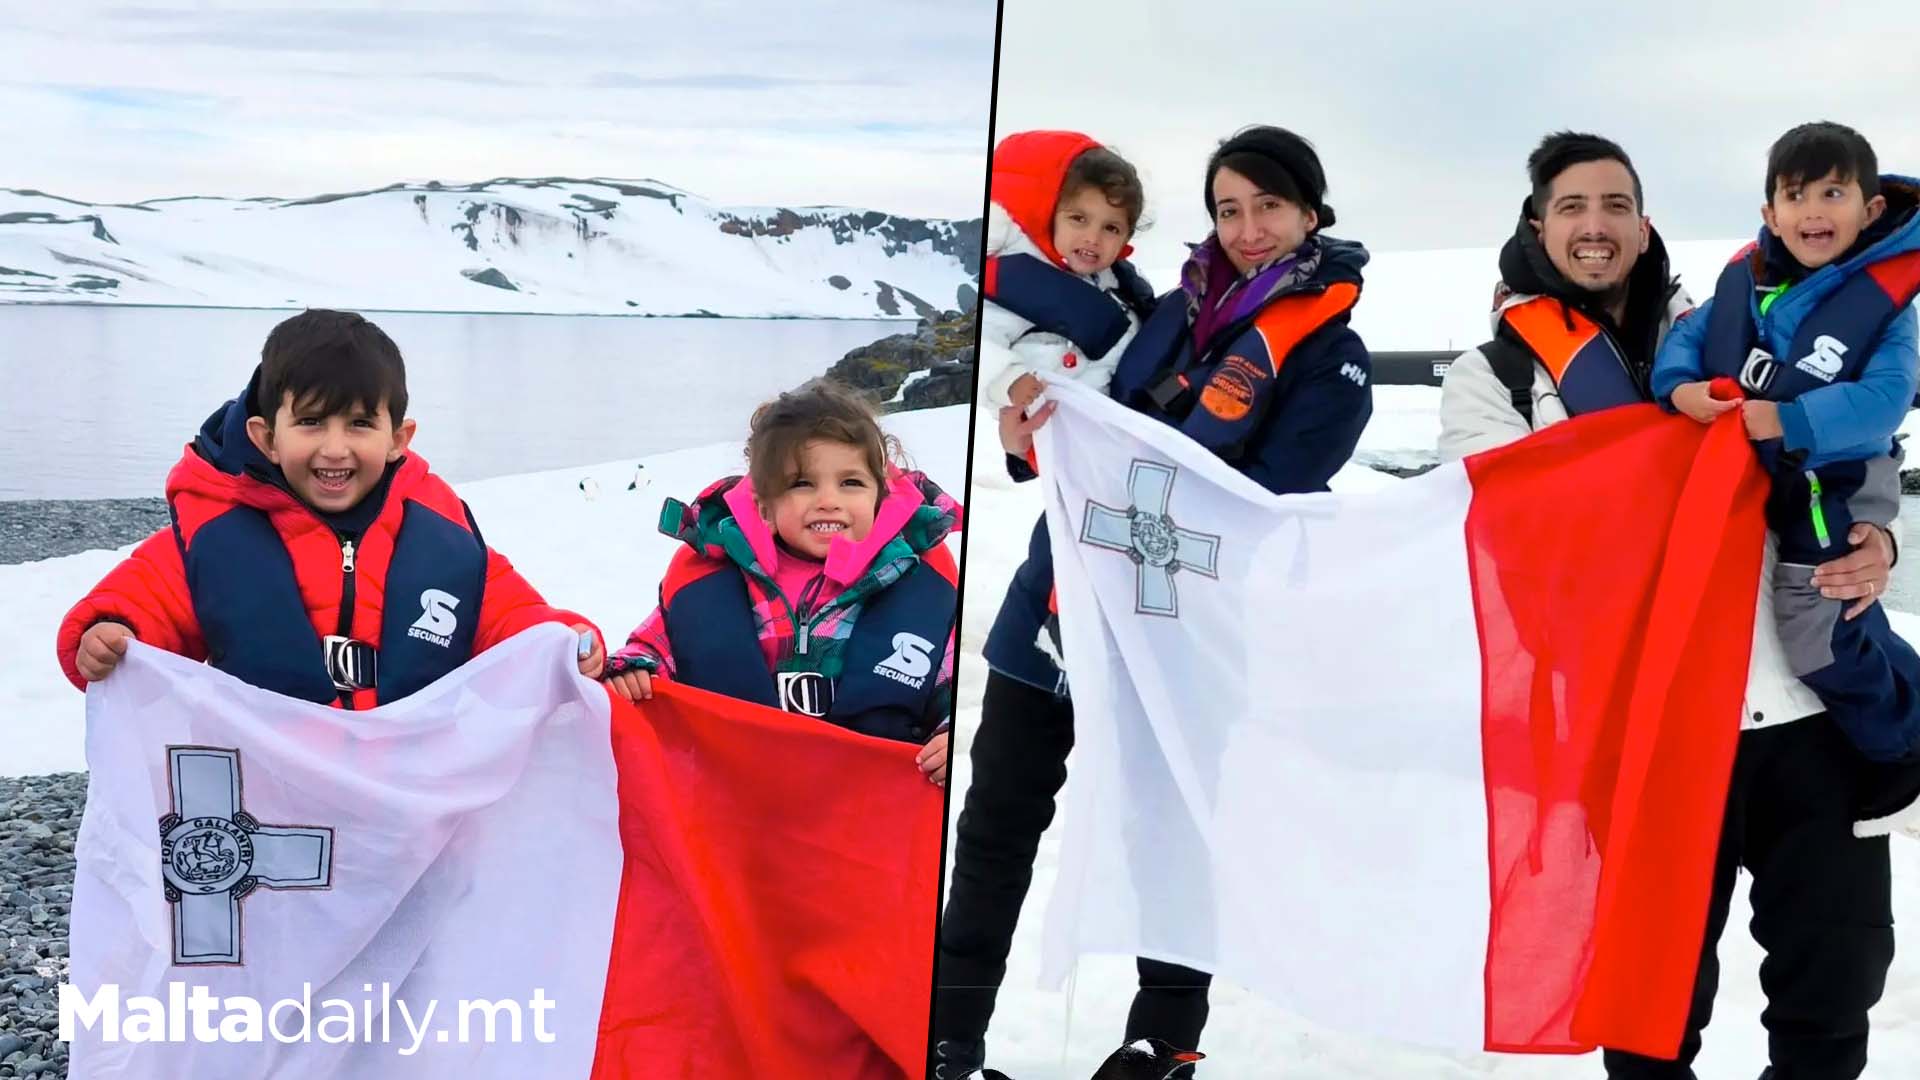 Youngest Maltese Kids Ever In Antartica?